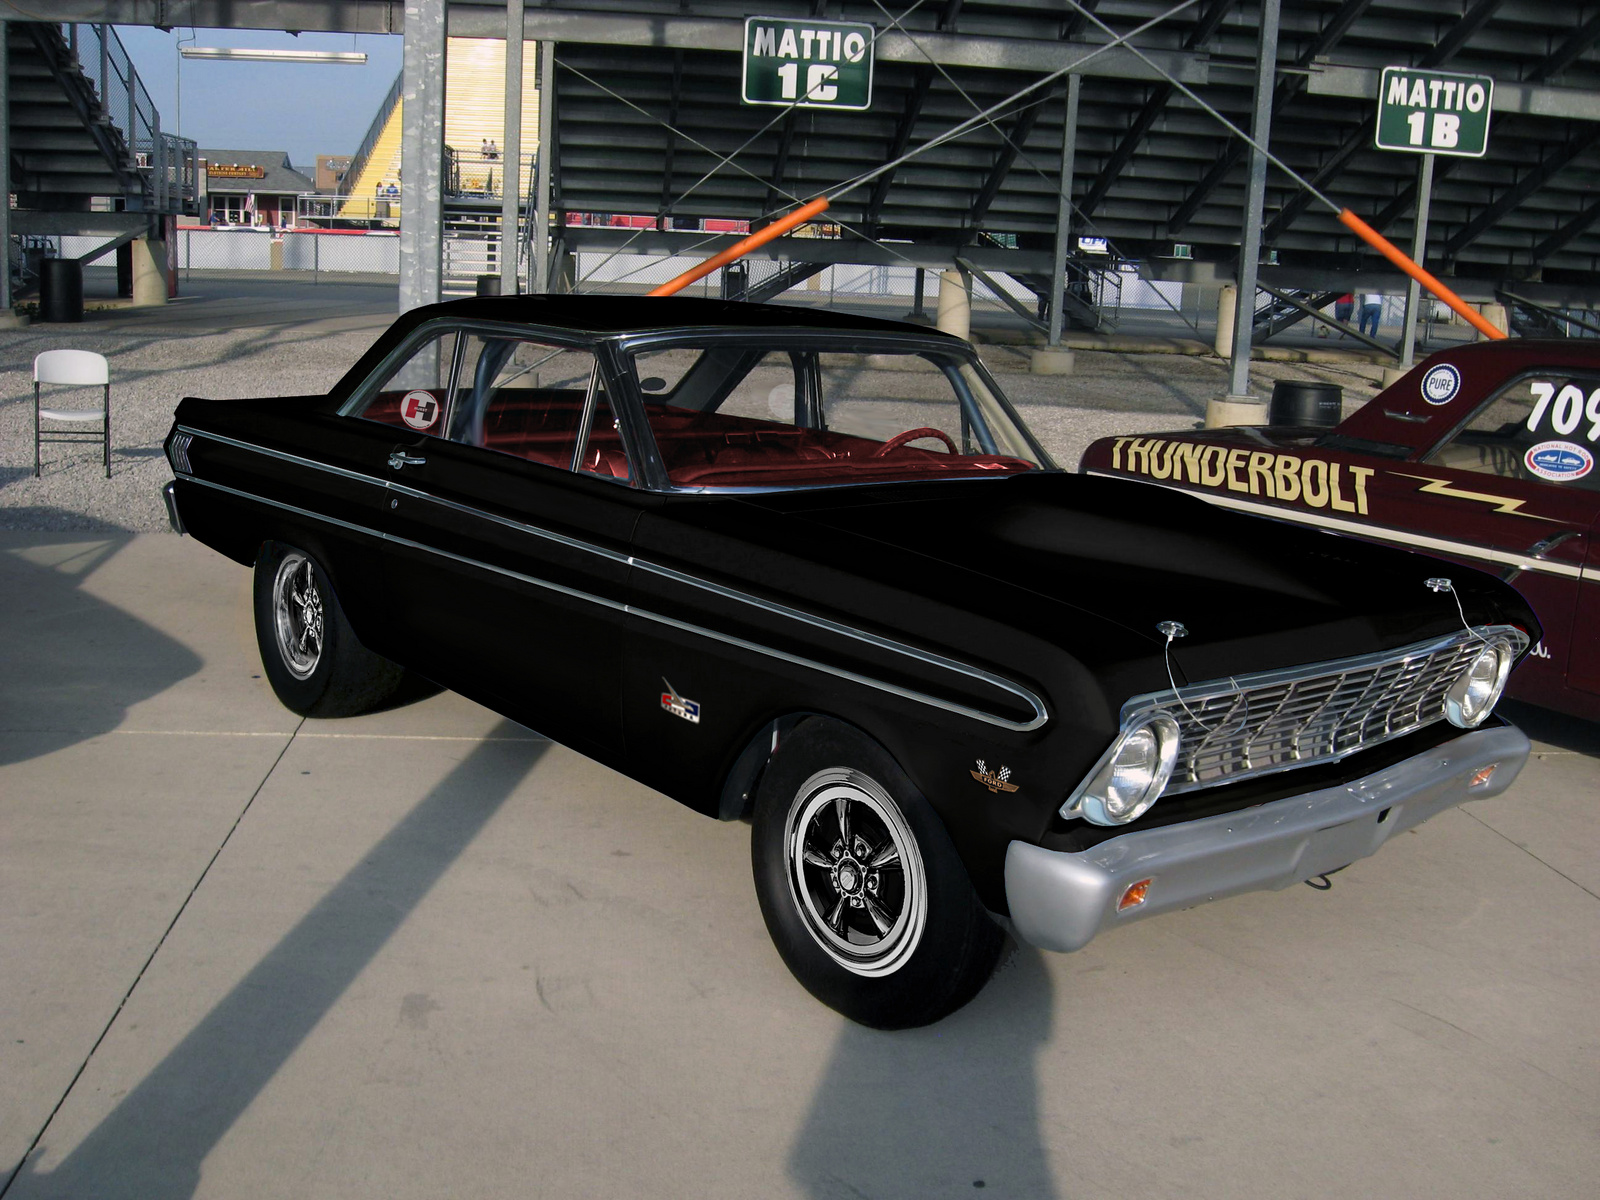 1964 Ford Falcon HD wallpapers, Desktop wallpaper - most viewed